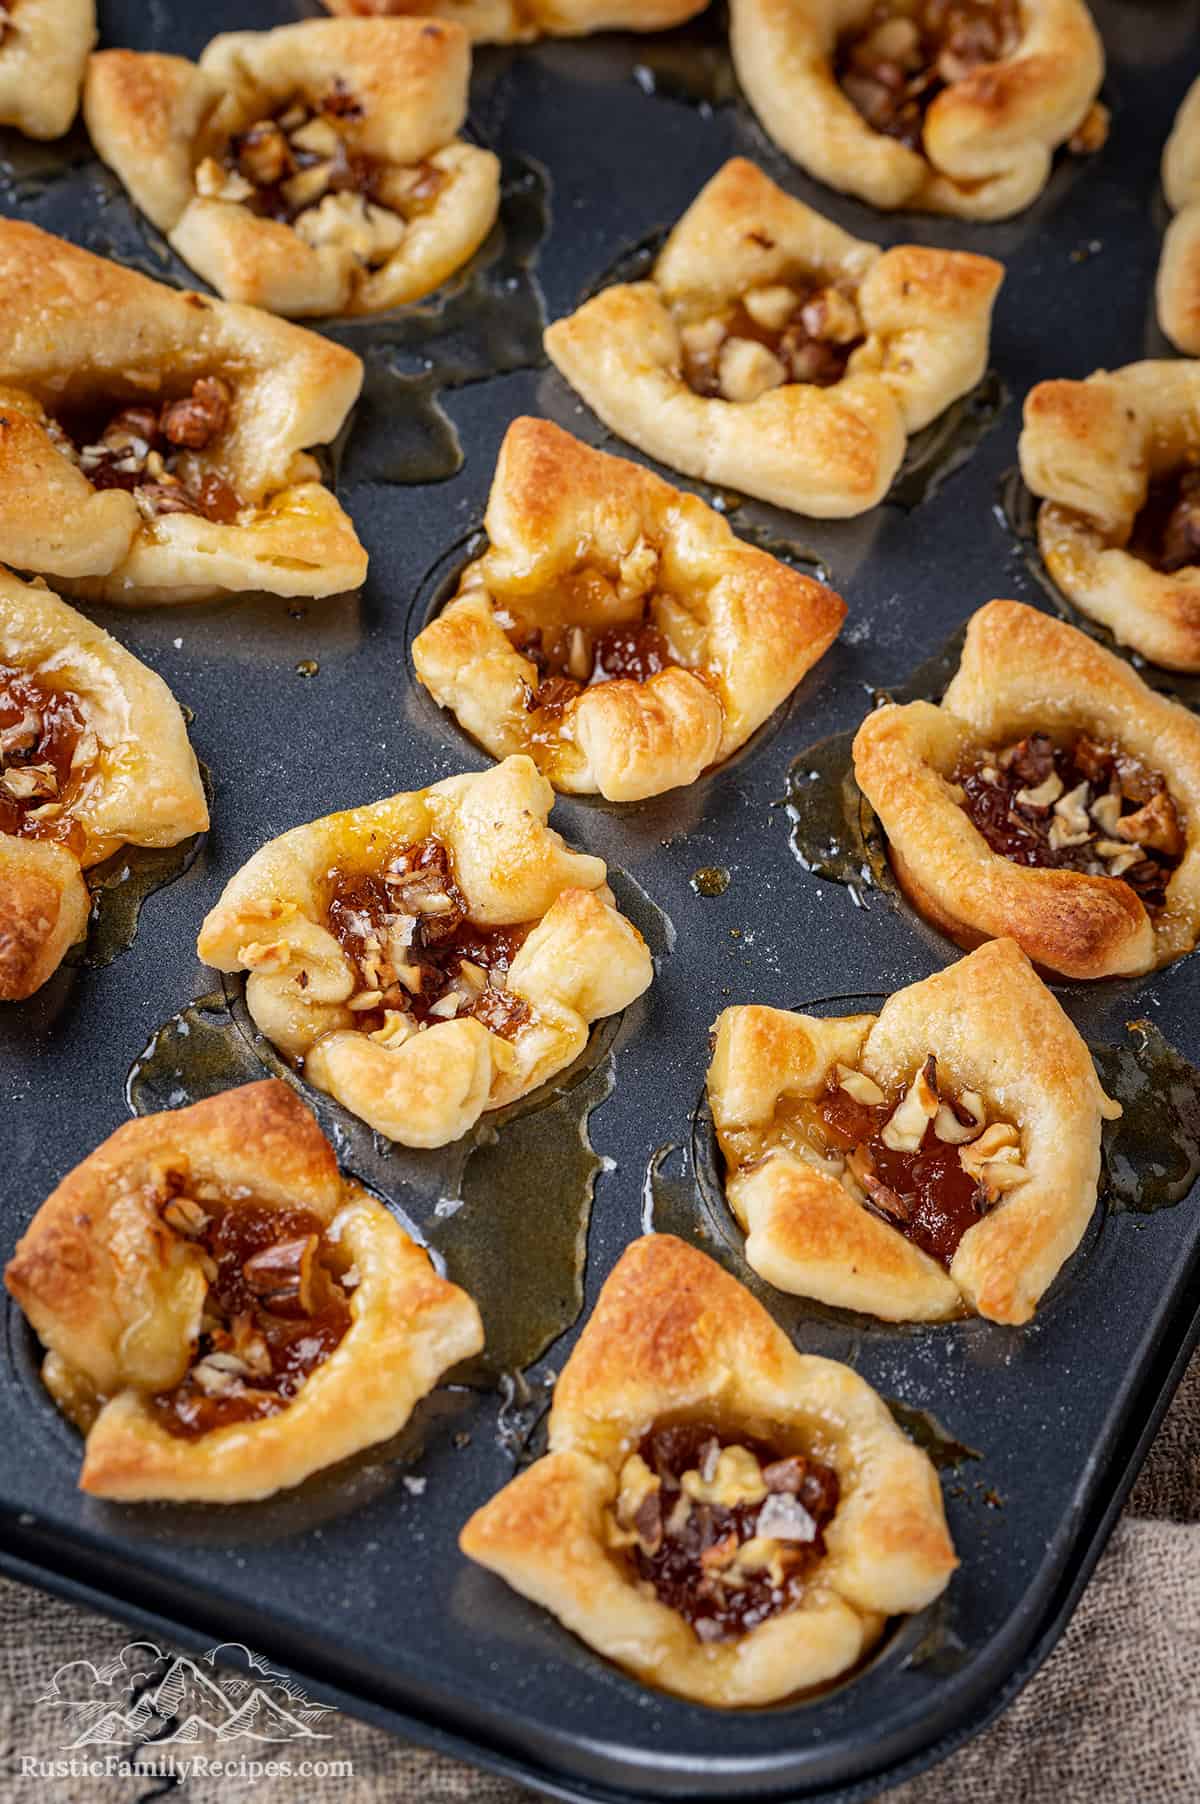 Apricot brie bites baked in muffin tin